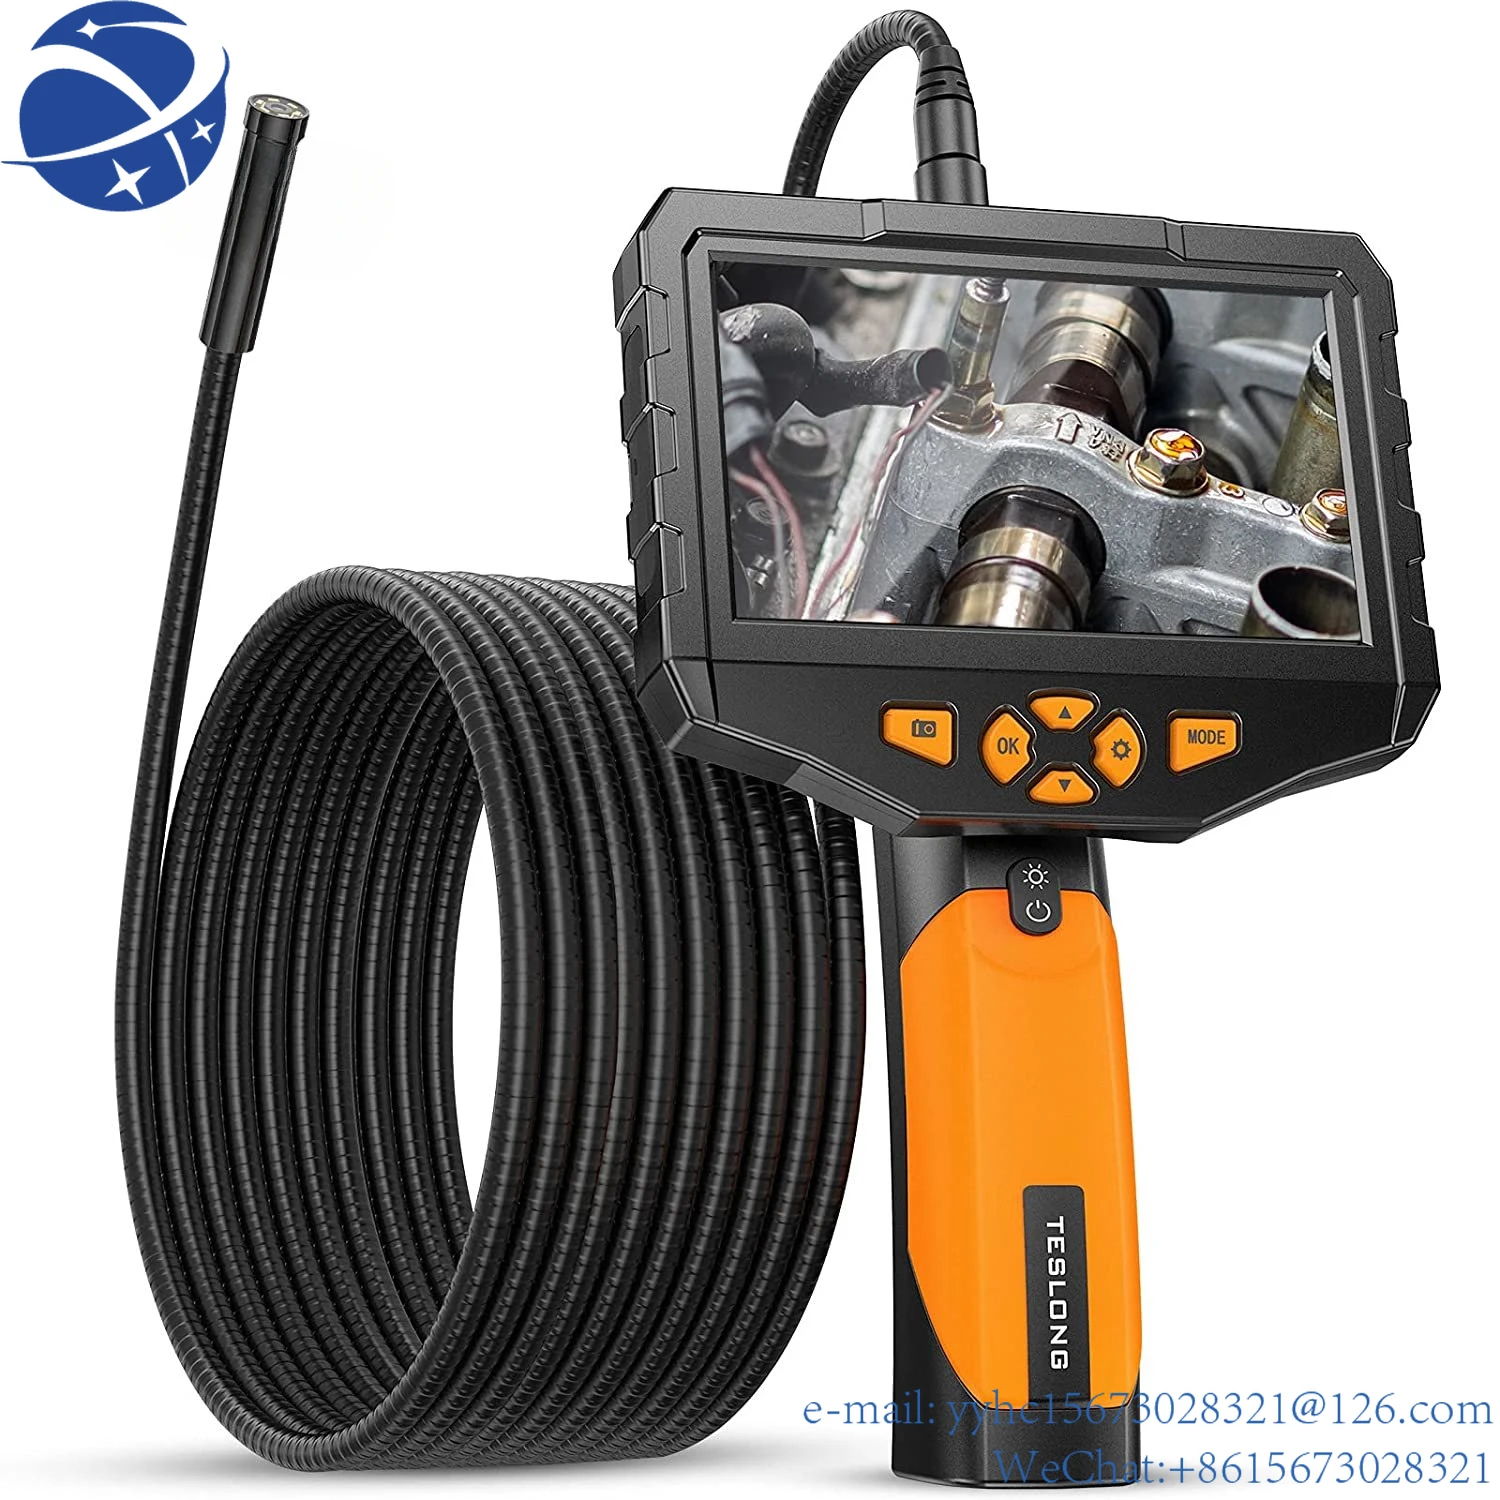 

YunYi Teslong 8MM Dual Lens Endoscope Camera IP67 Drain Sewer Industrial Borescope with 5Inch IPS Display Inspection Camera